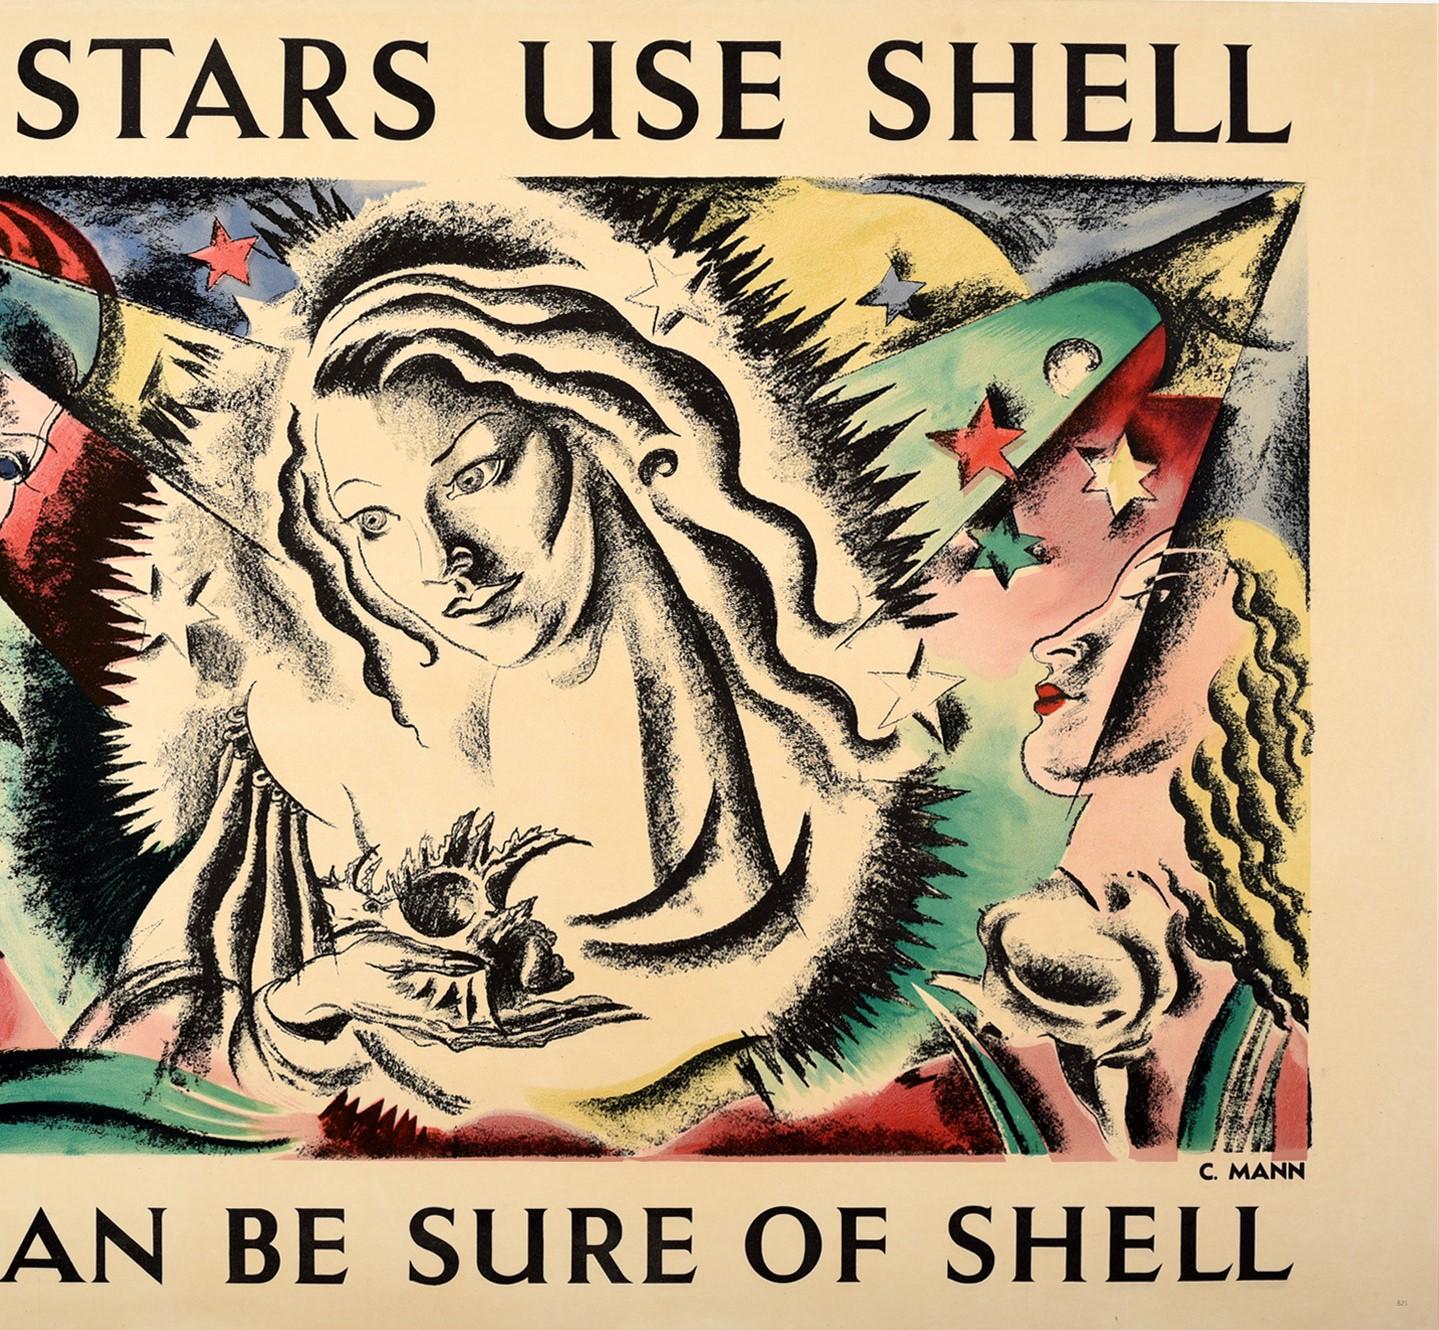 Original Vintage Shell Poster Film Stars Use Shell You Can Be Sure Of Shell In Excellent Condition For Sale In London, GB